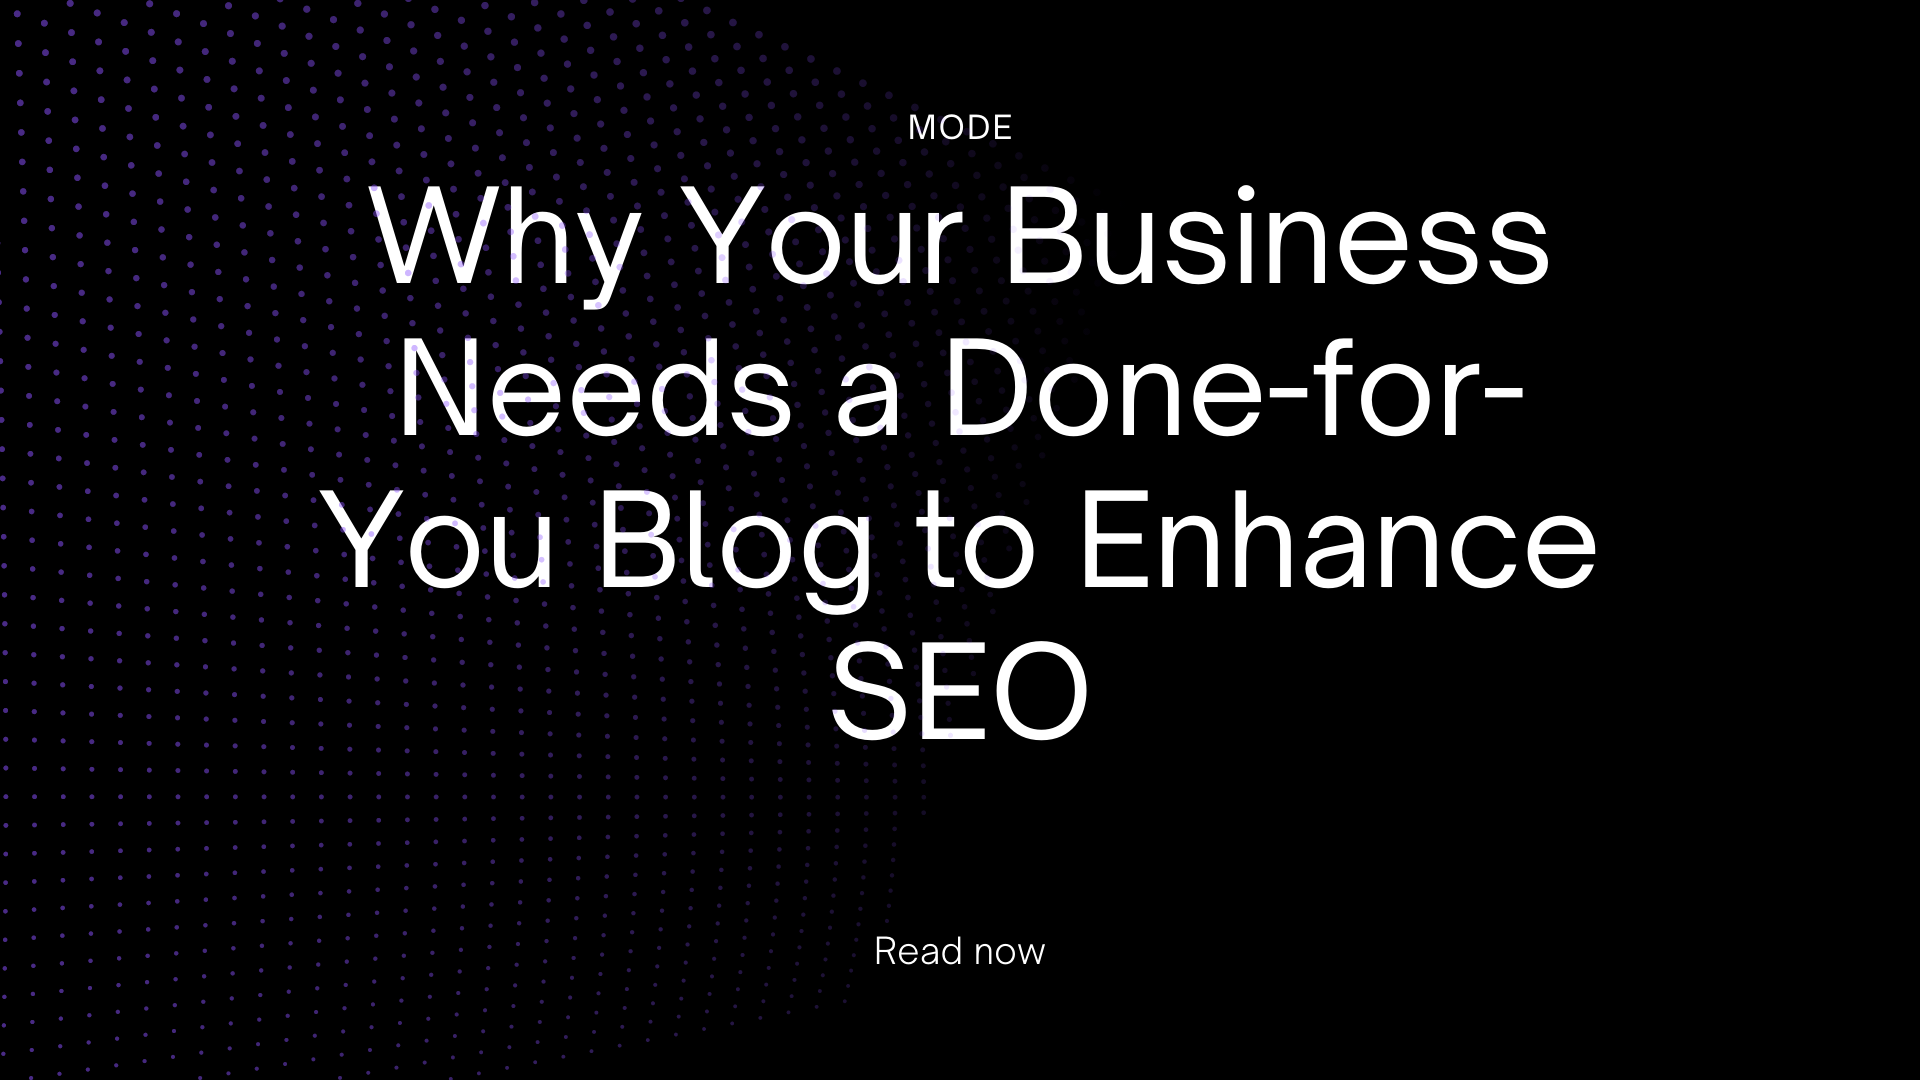 Why Your Business Needs a Done-for-You Blog to Enhance SEO